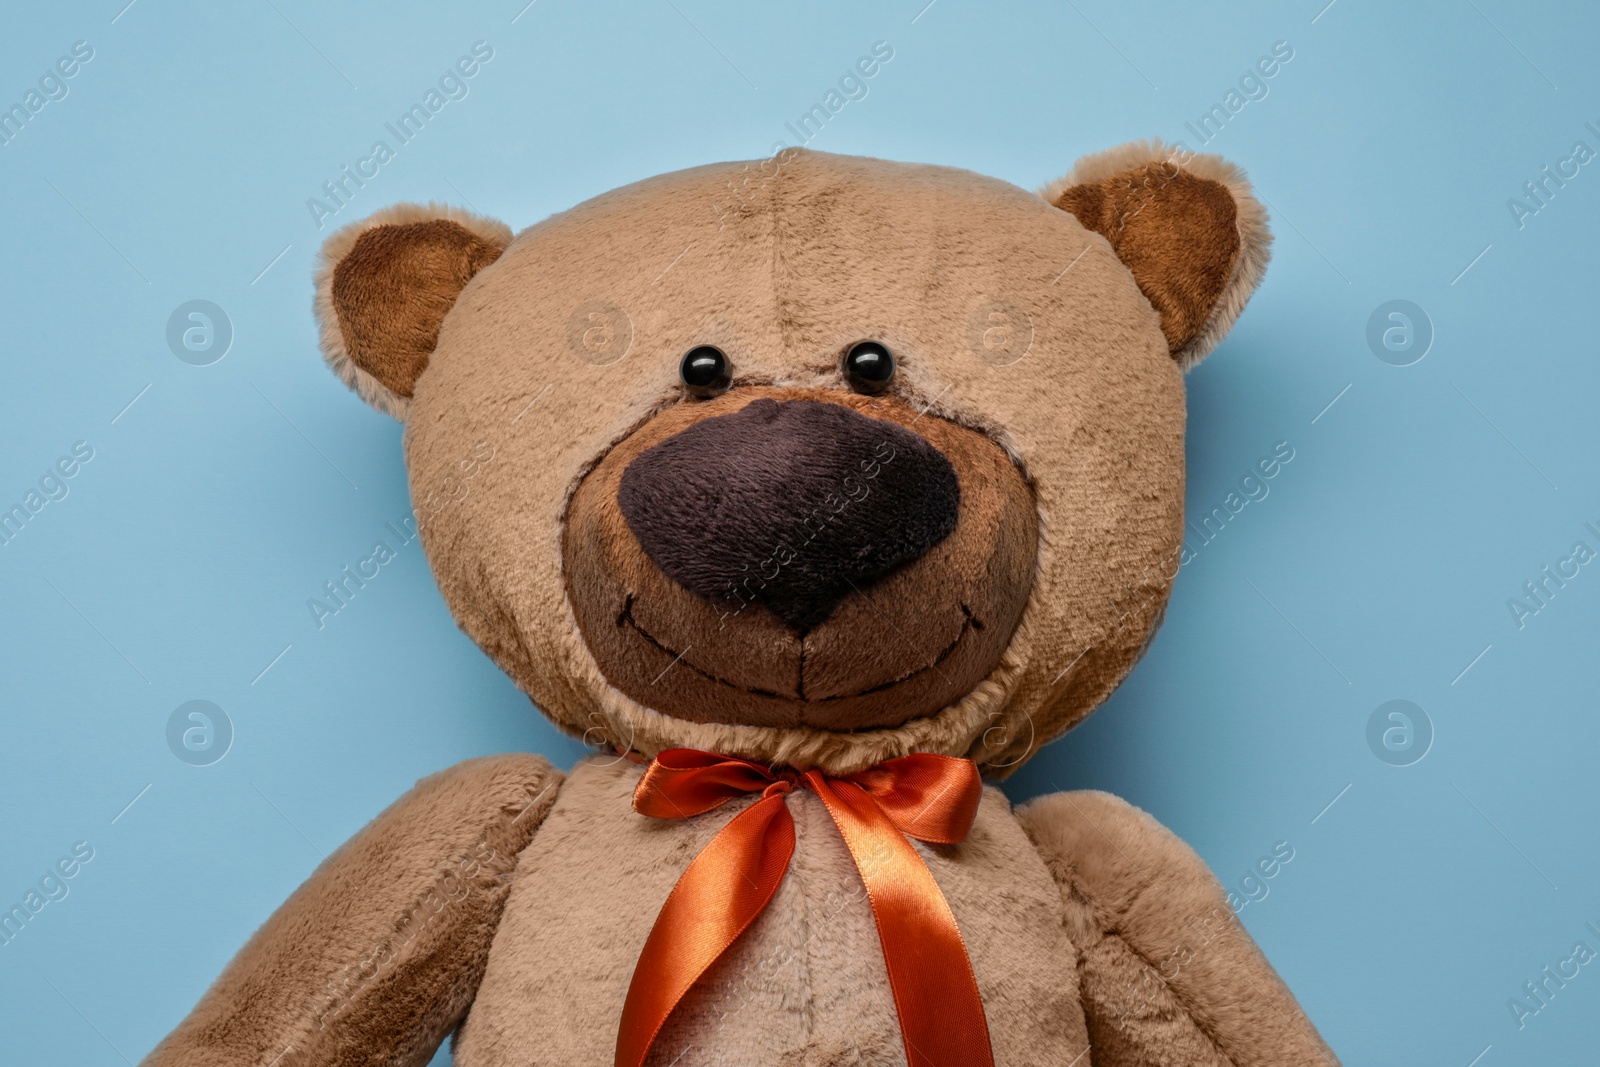 Photo of Cute teddy bear on light blue background, top view